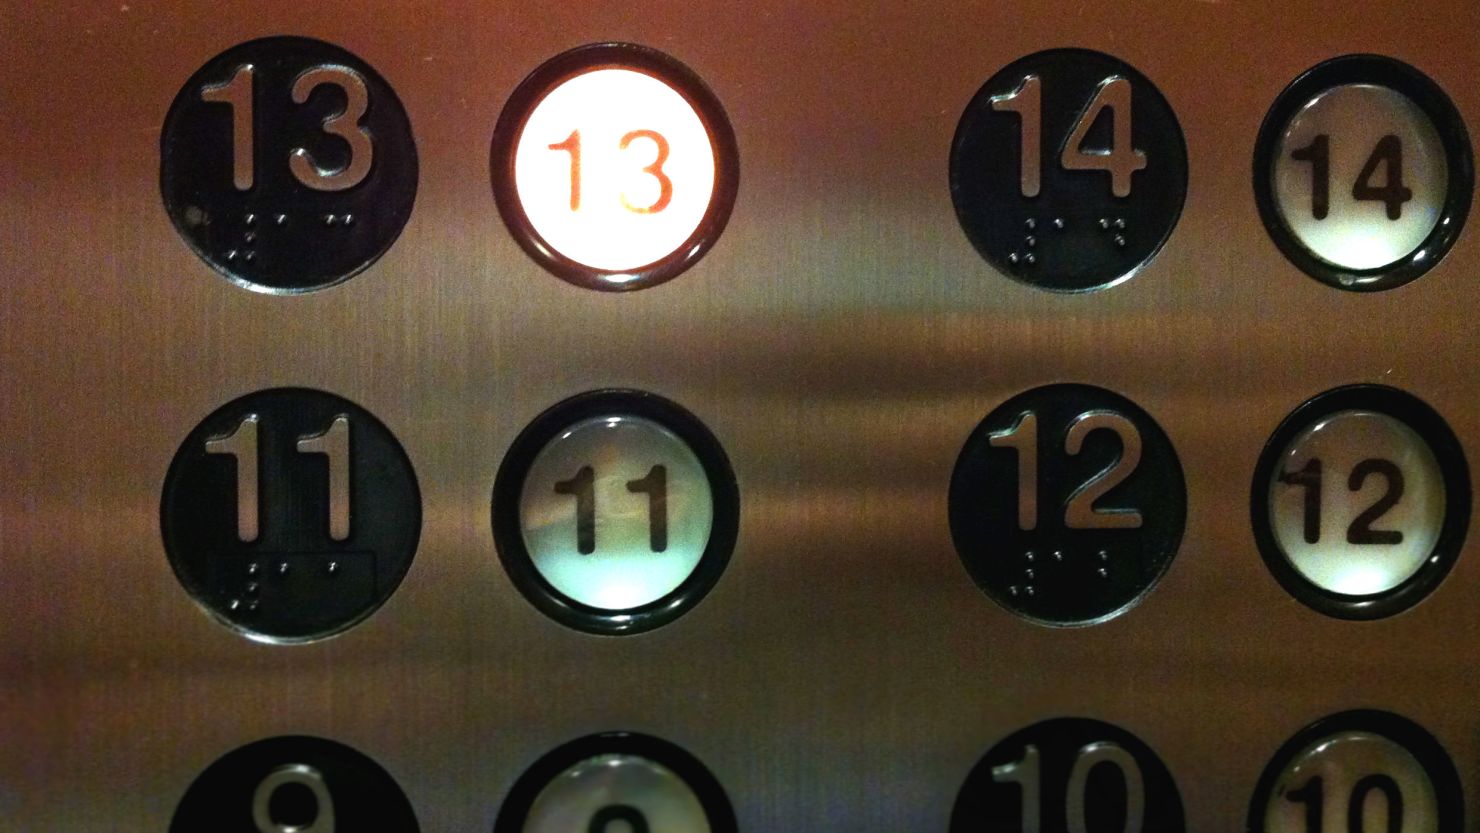 Oh look, an elevator that's not afraid to stop on 13